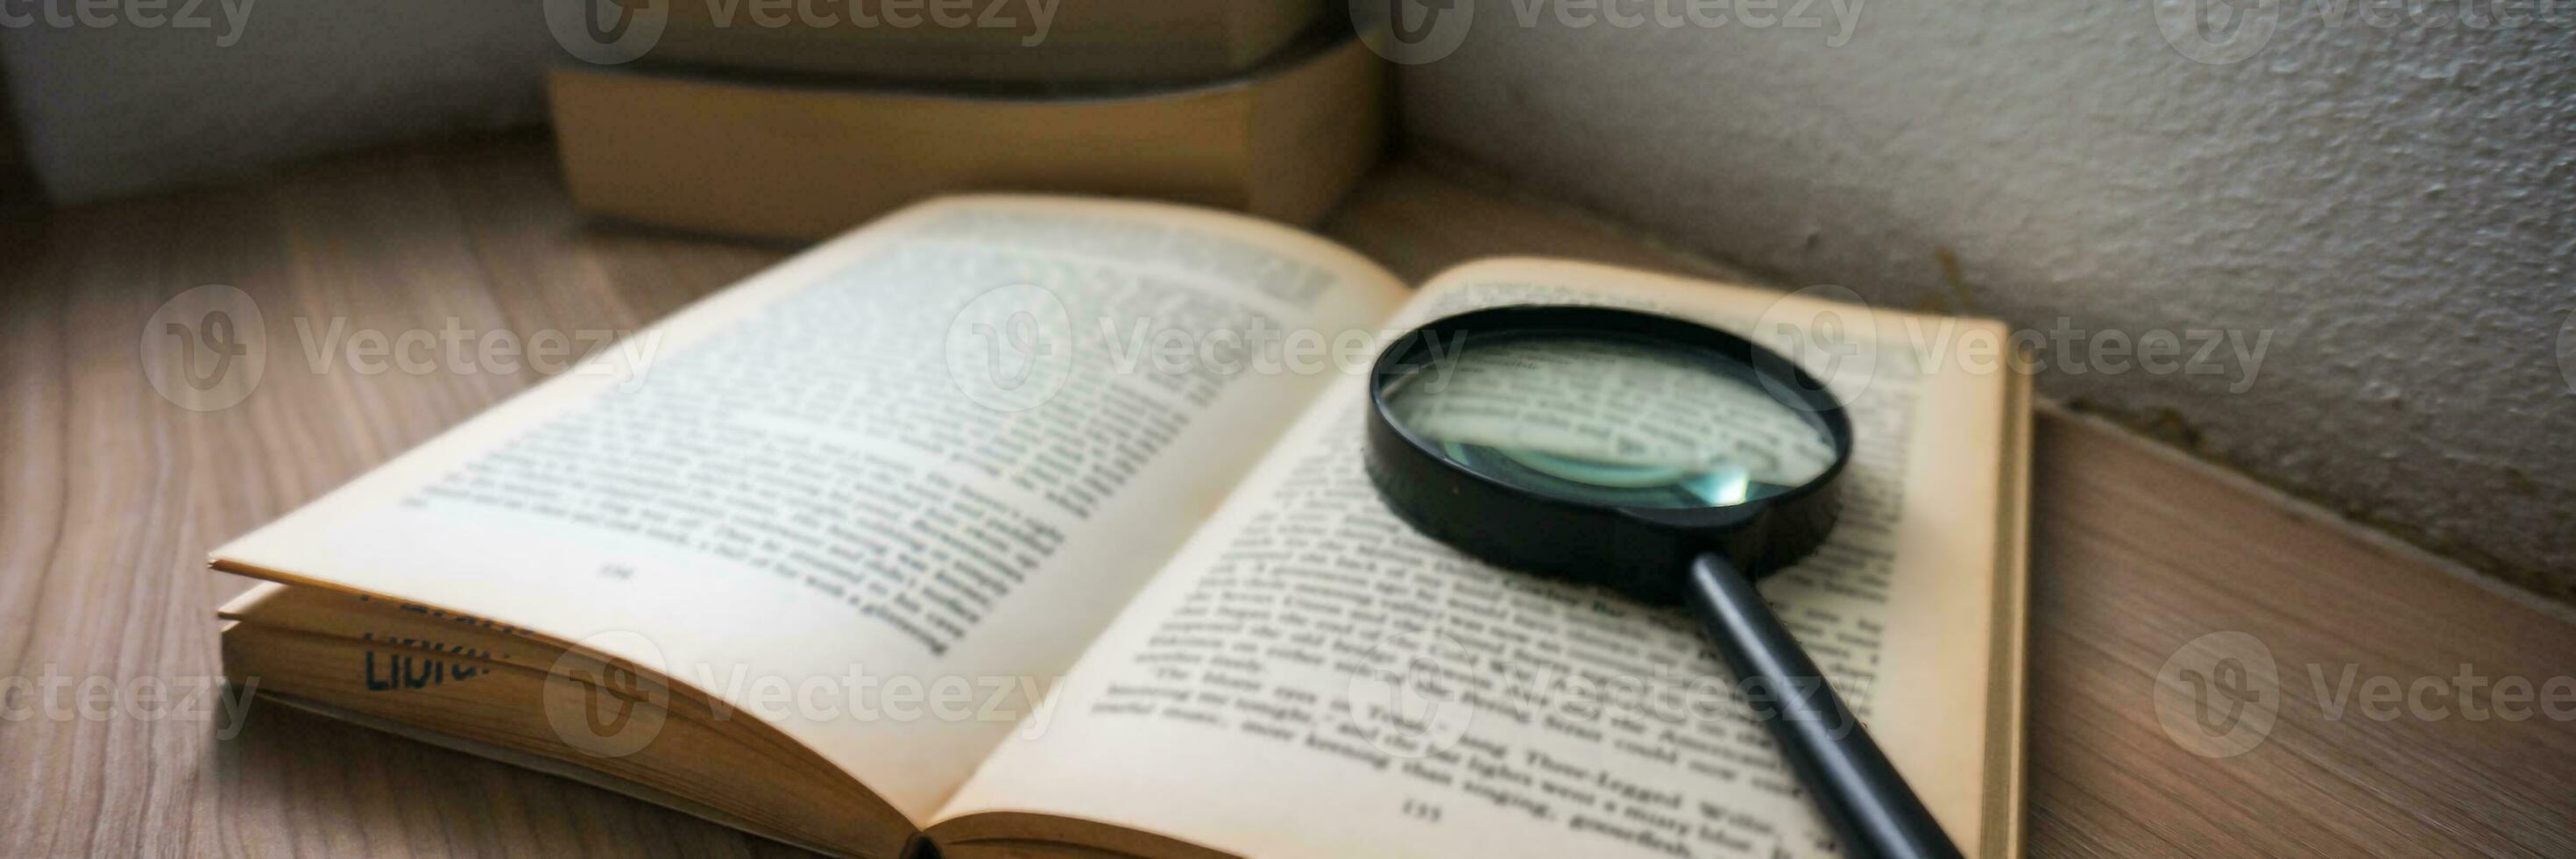 Books and a magnifier Research concept. Magnification glass over a opened book. photo